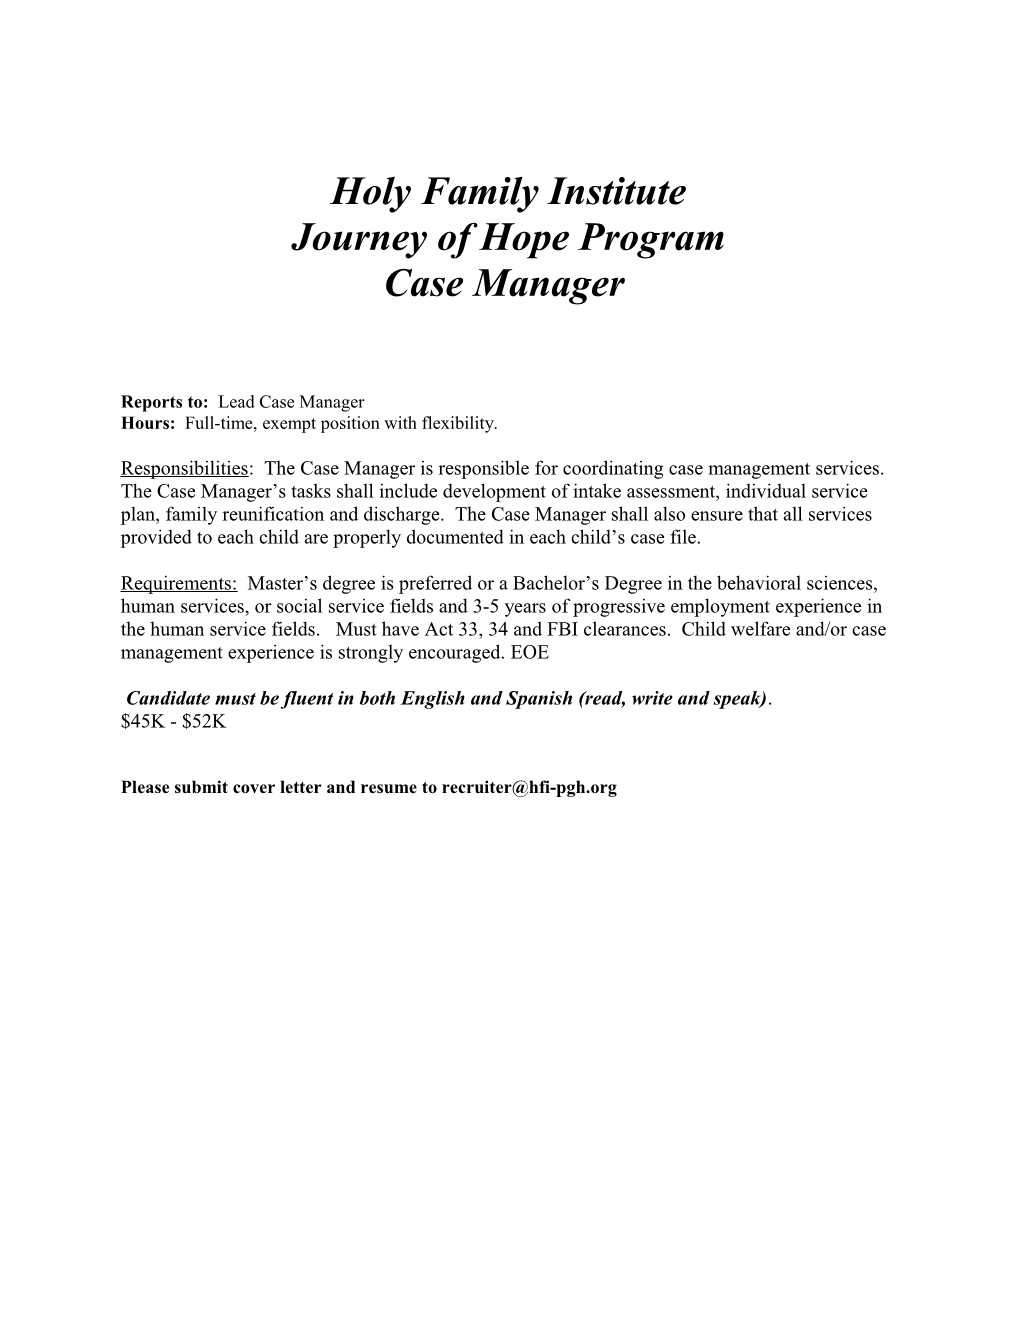 Director of Unifiedtreatment Holy Family Institute - Pittsburgh